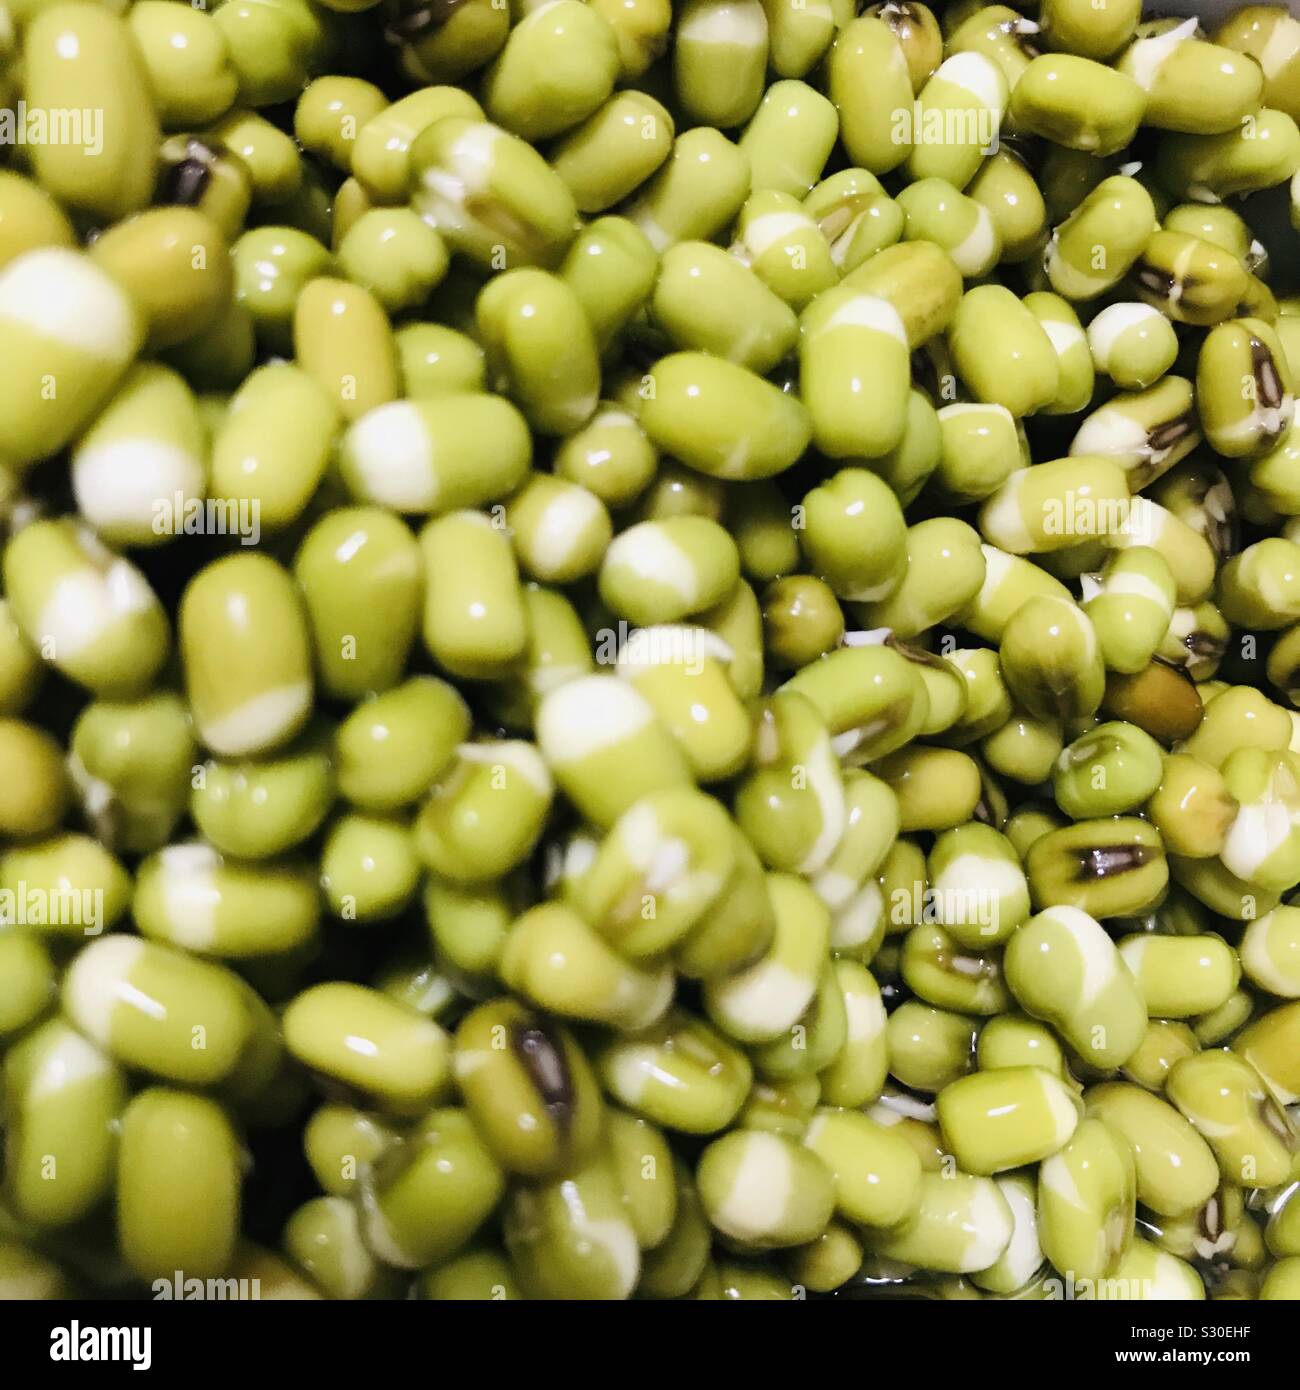 Soaked sprouted mung bean Stock Photo